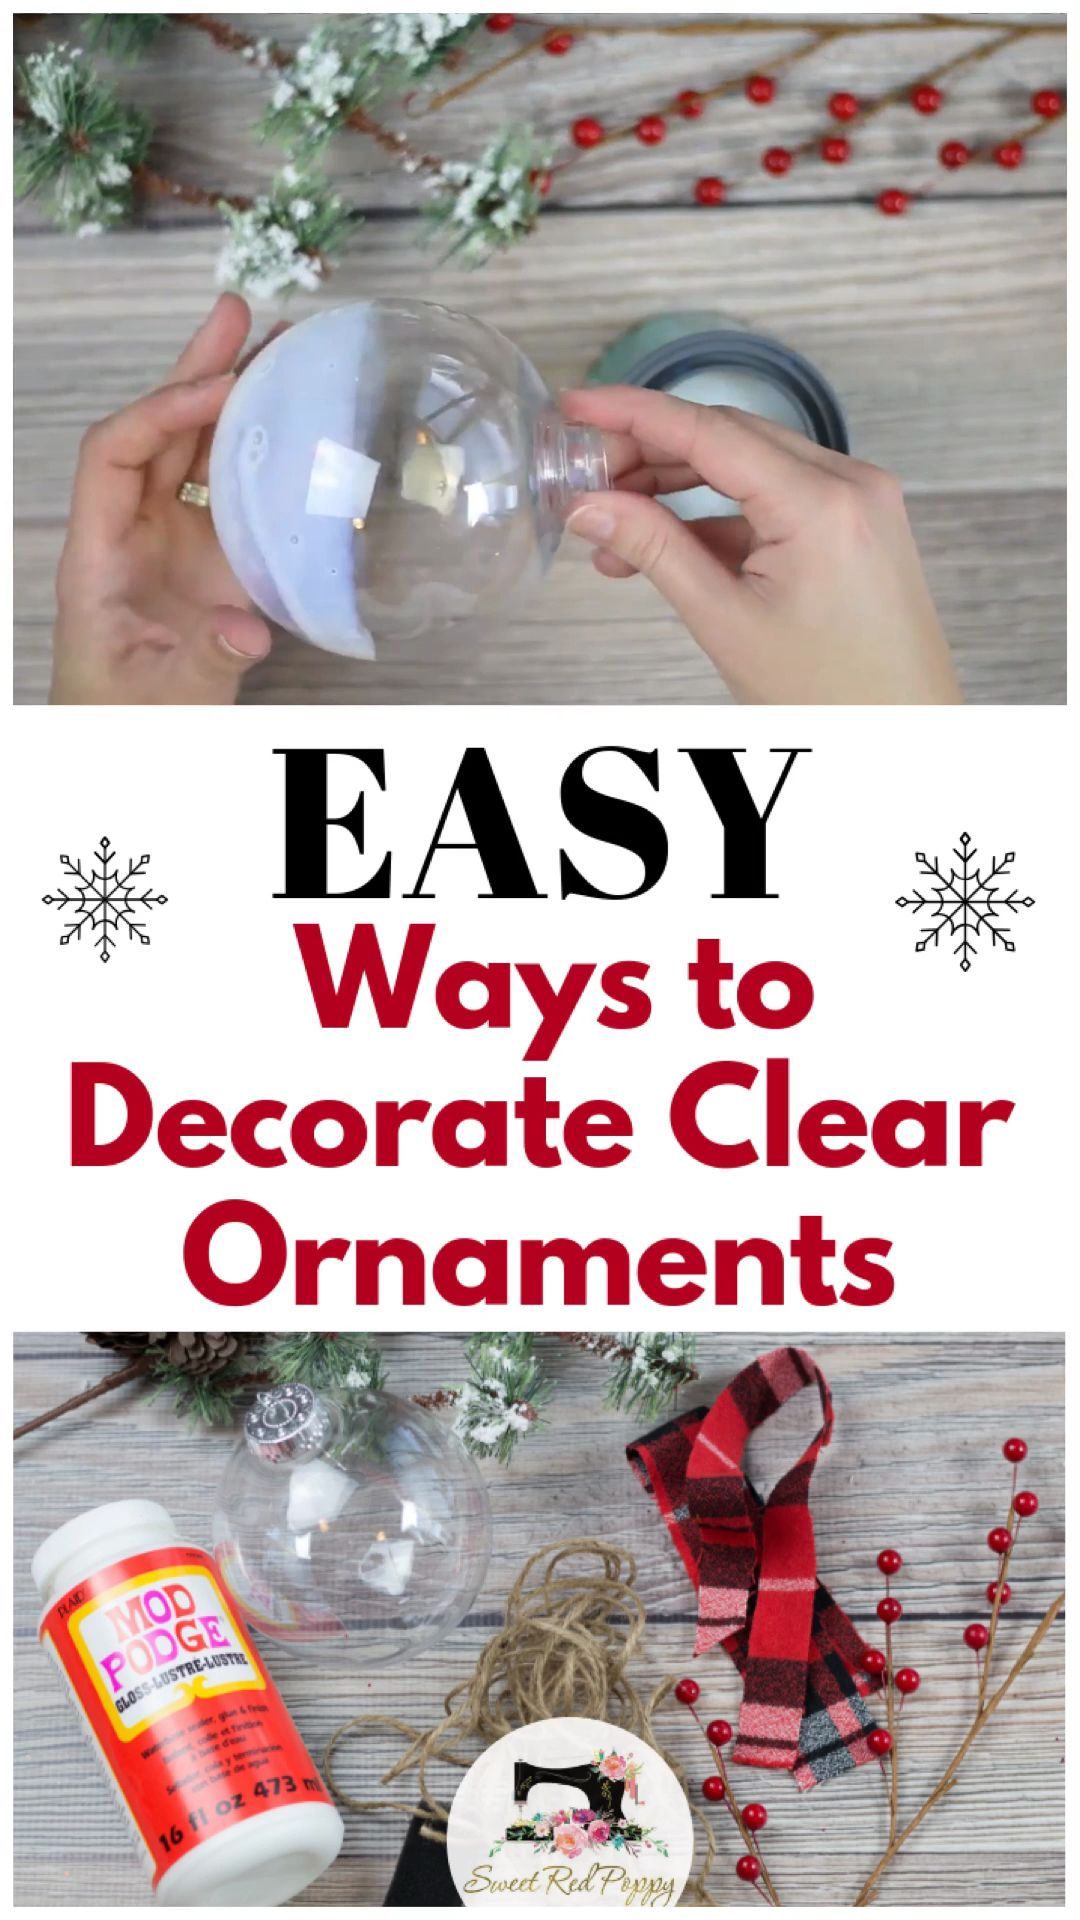 Easy Ways to Decorate Clear Plastic Ornaments for Christmas - Sweet Red Poppy - Easy Ways to Decorate Clear Plastic Ornaments for Christmas - Sweet Red Poppy -   10 diy Christmas Decorations for party ideas